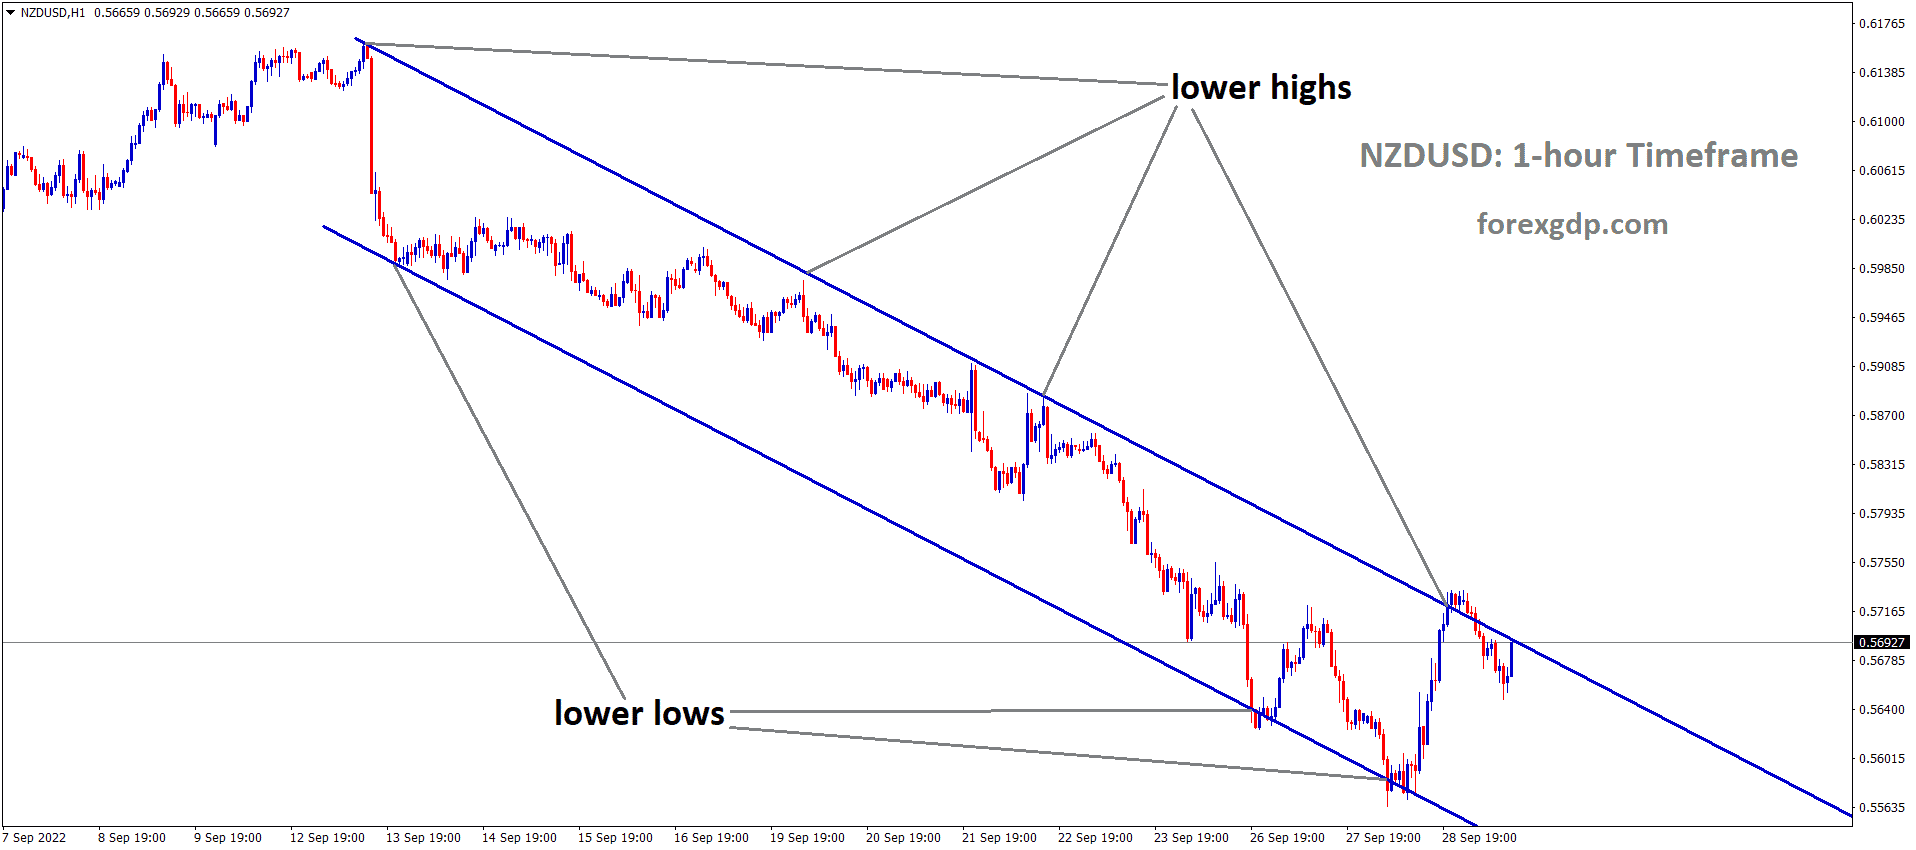 NZDUSD is moving in the Descending channel and the market has reached the lower high area of the channel 1